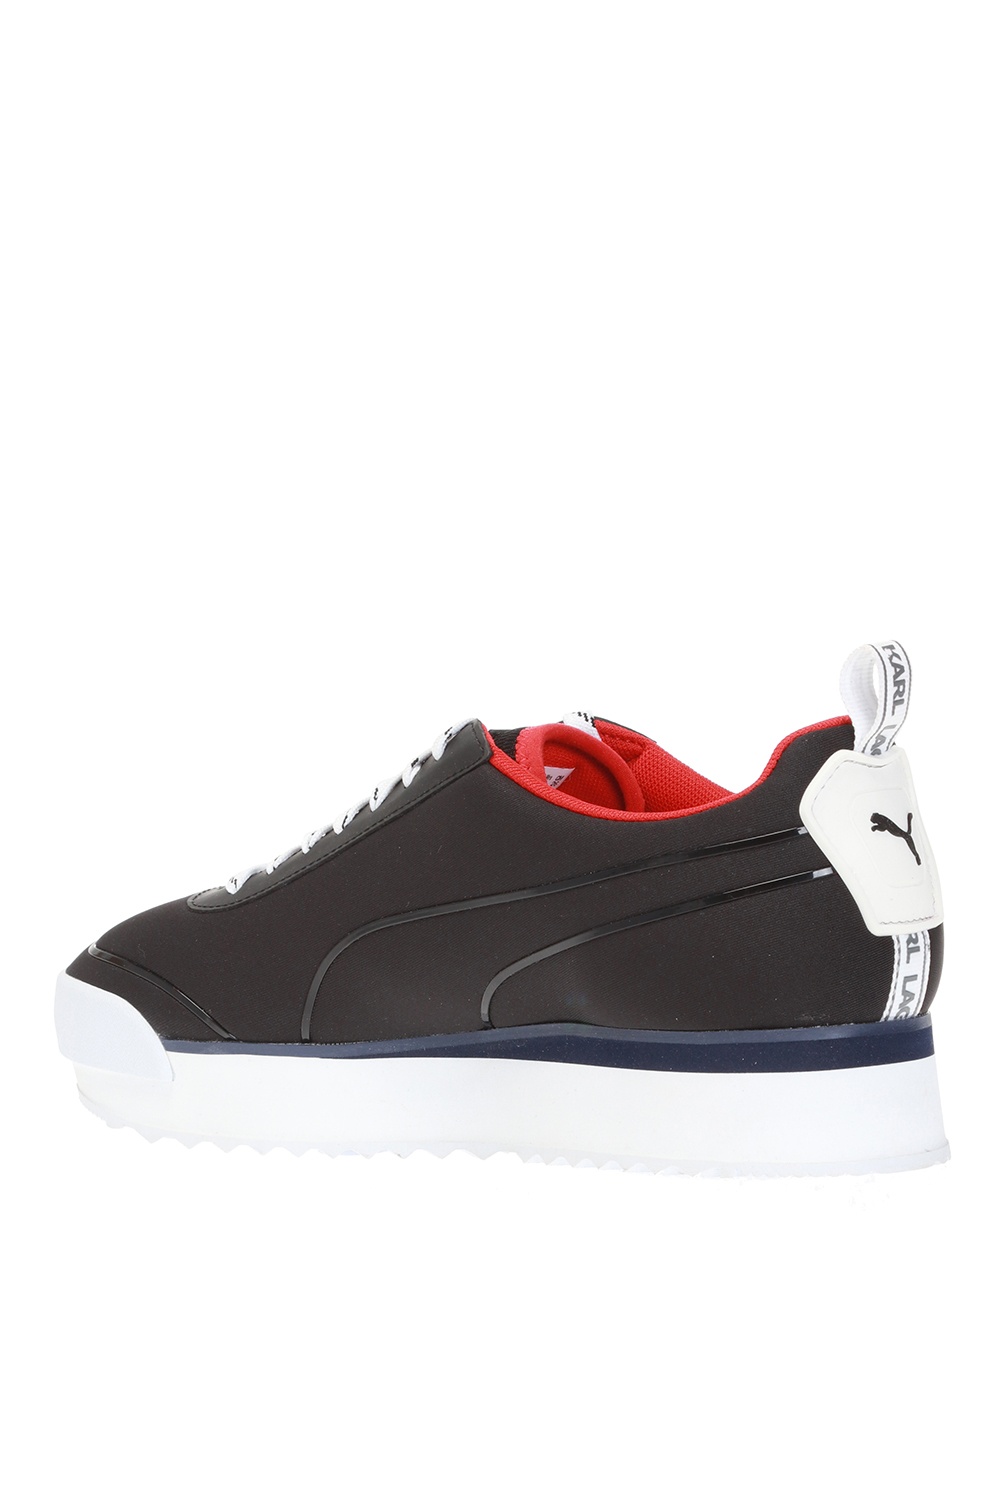 Where to Buy Karl Lagerfeld x PUMA Collection